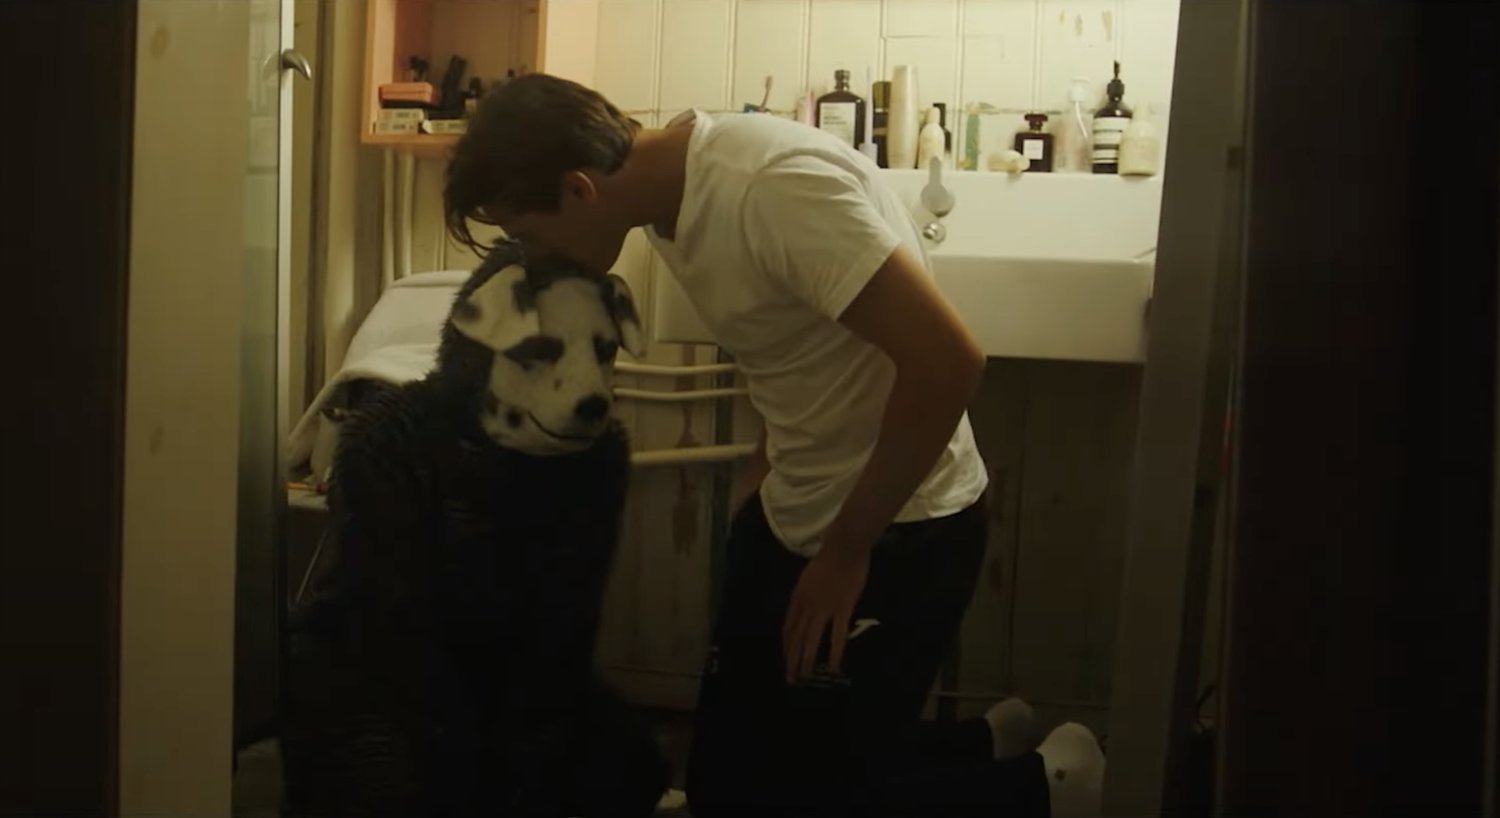 Weird Trailer For GOOD BOY a Thriller About Guy in a Dog Costume That is Treated Like a Dog